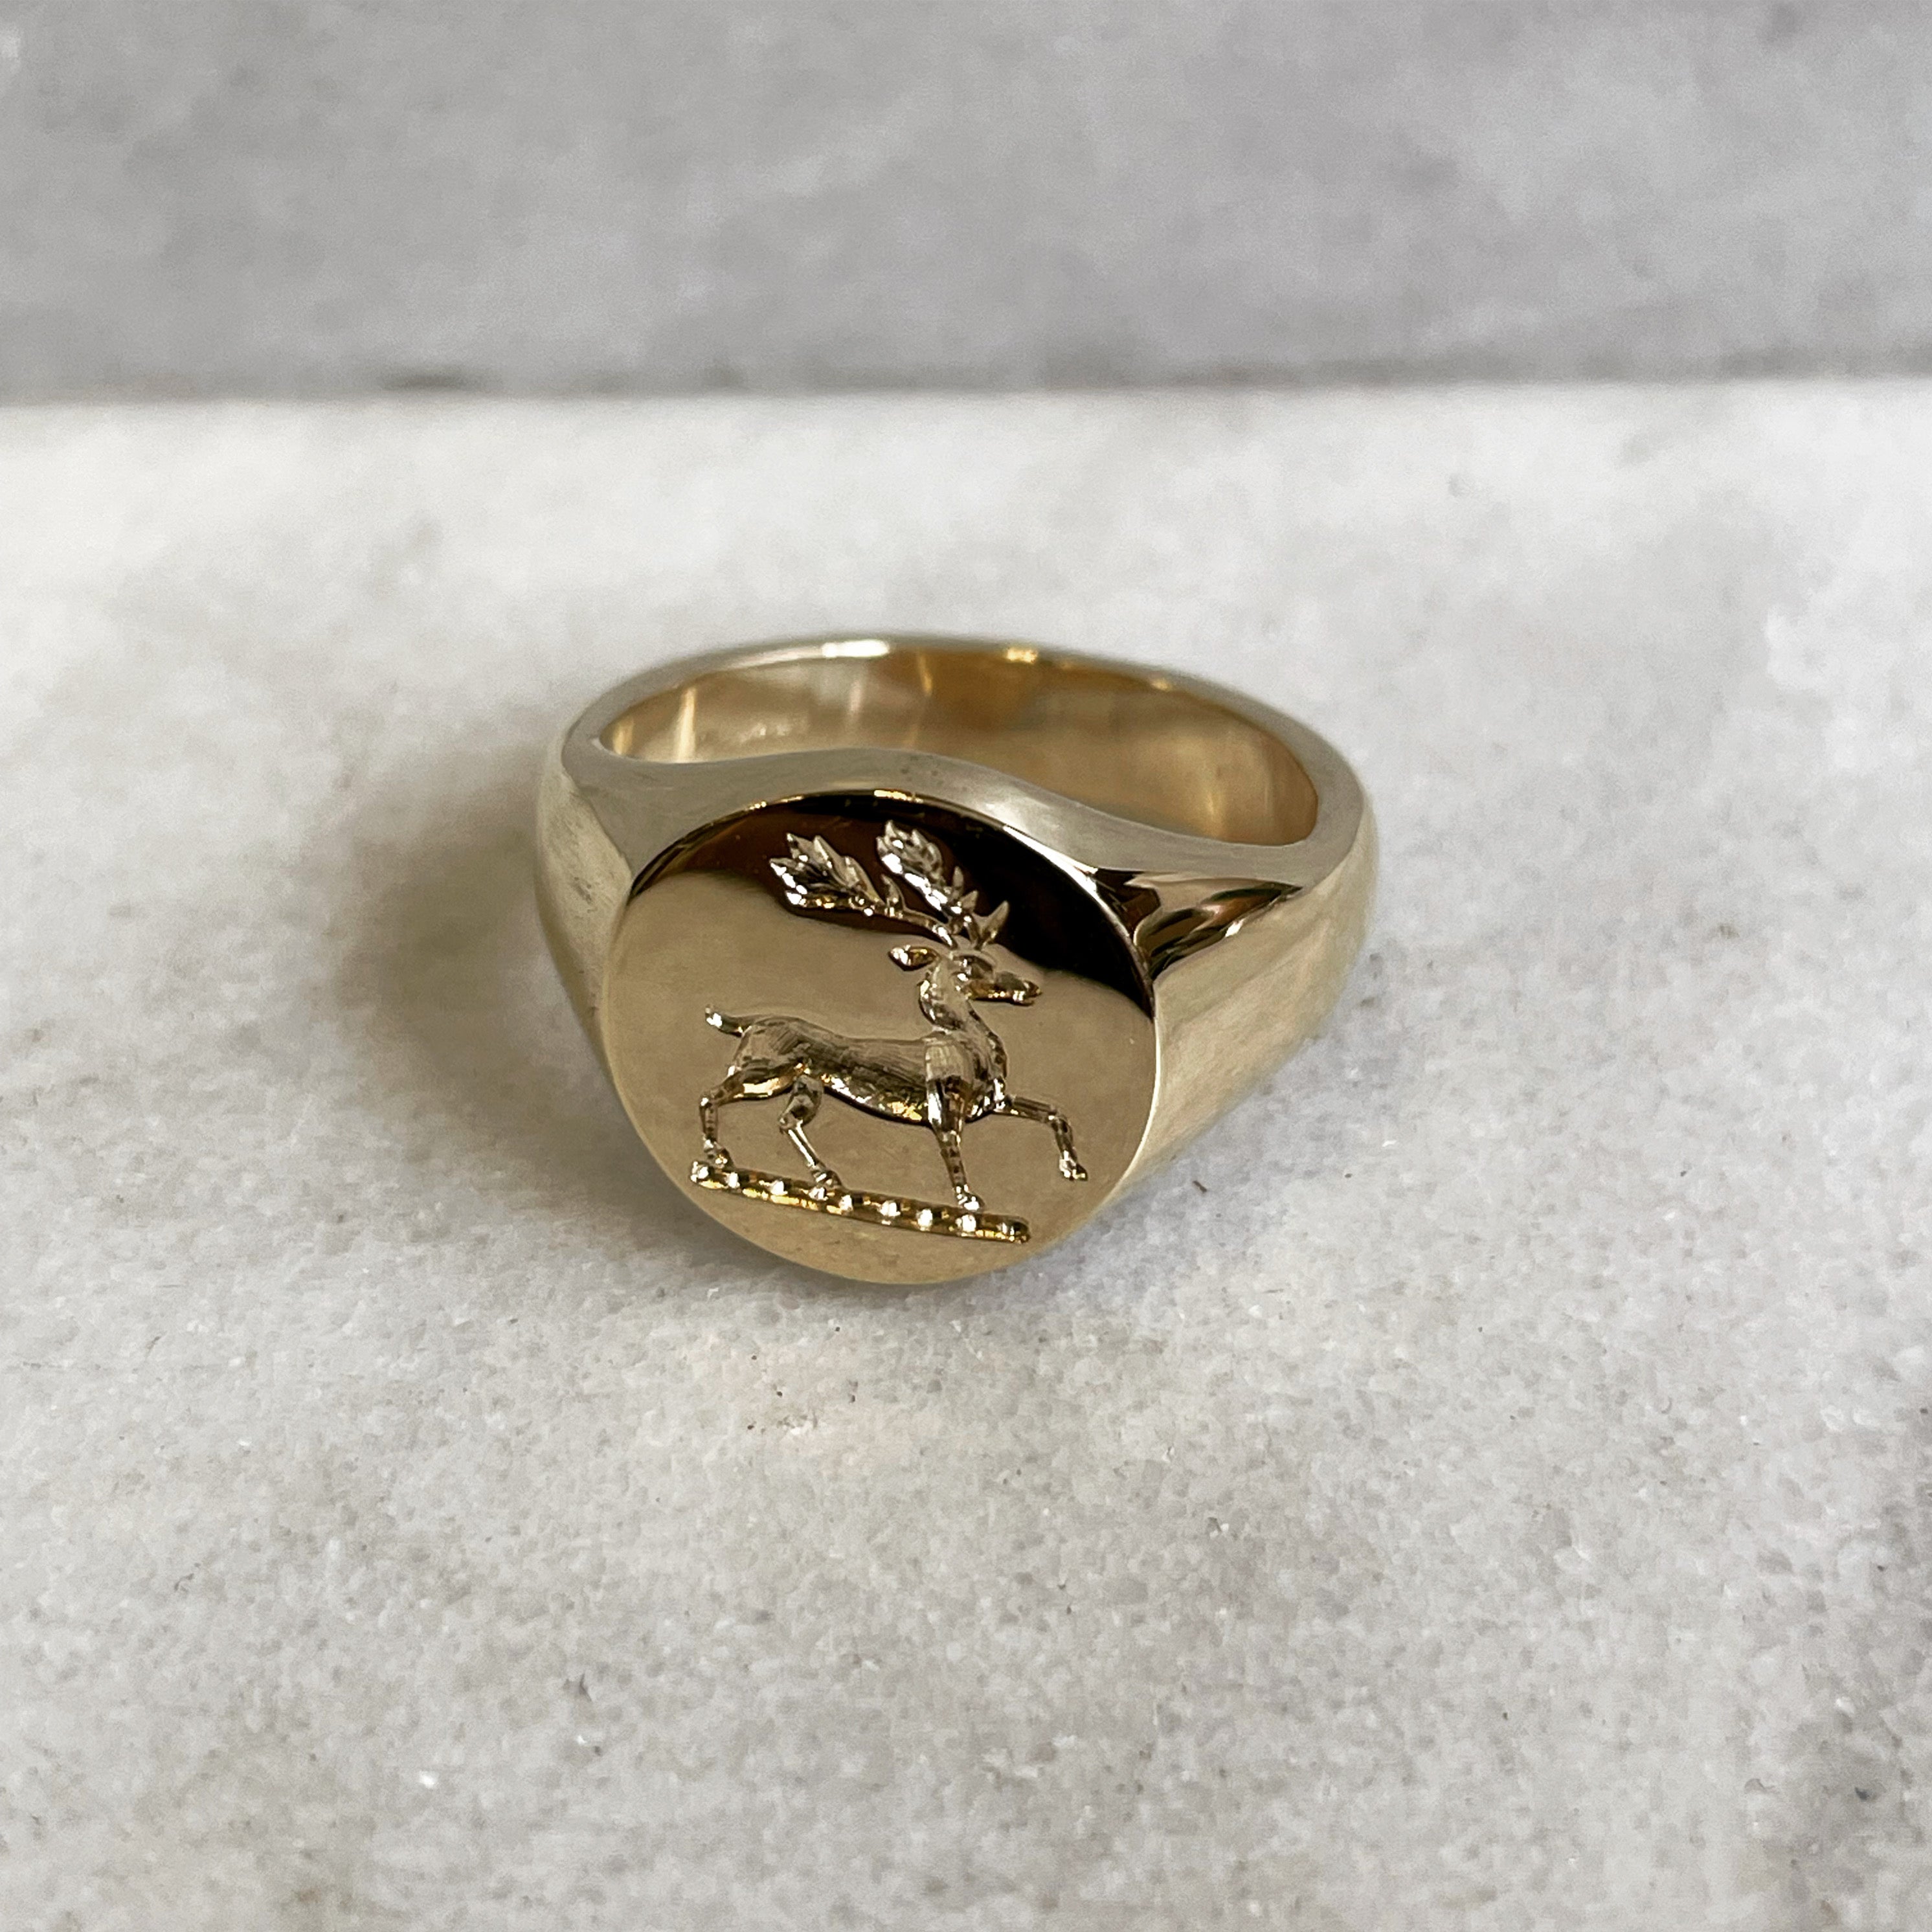 Hand Engraved Crest 18k Yellow Gold Round Signet Ring - From Your Design - 11mm